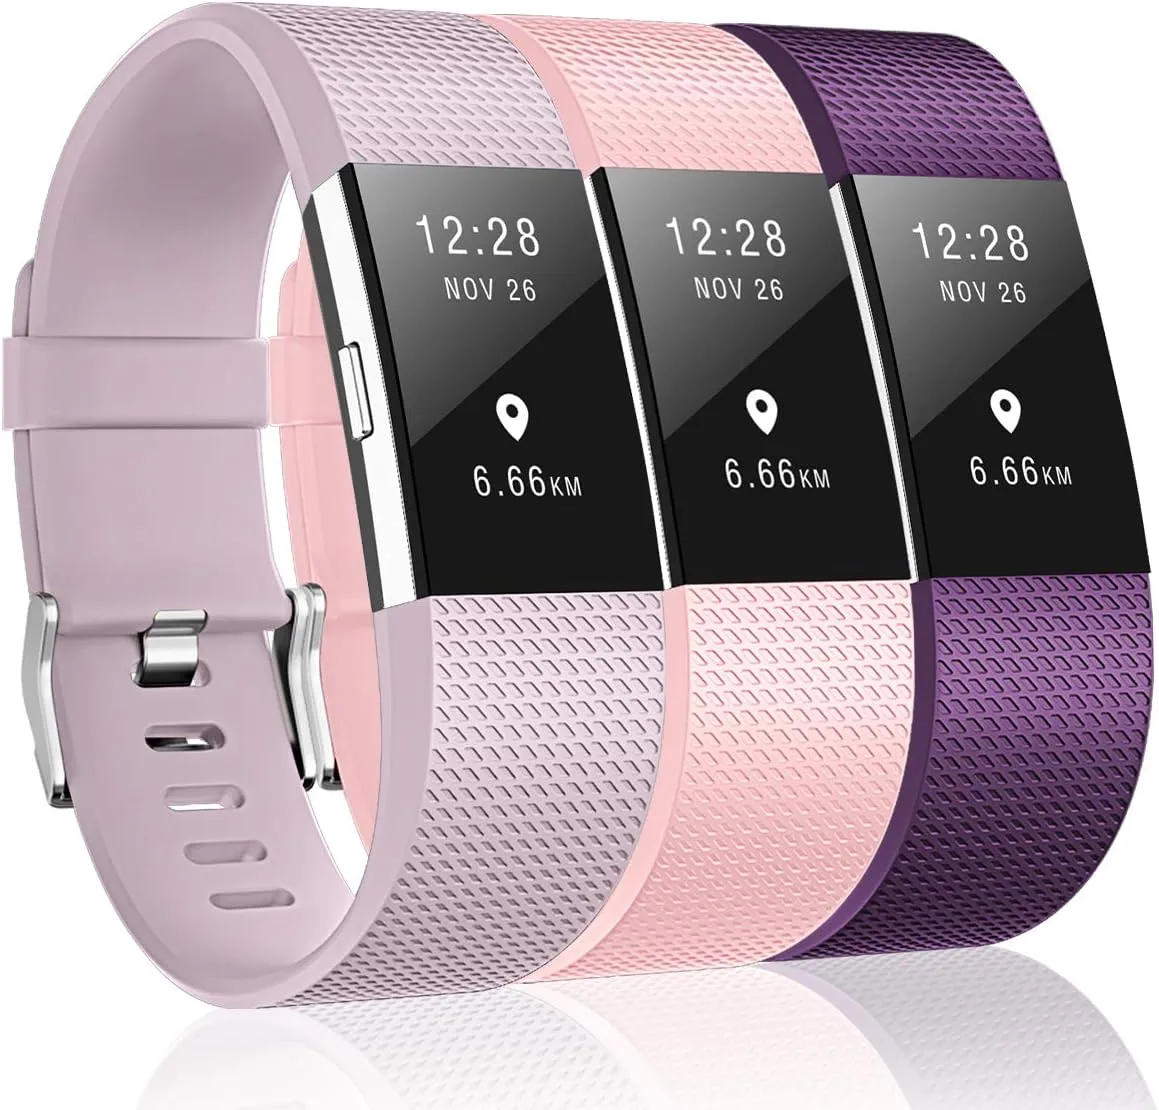 Bands for Fitbit Charge 2, for women men